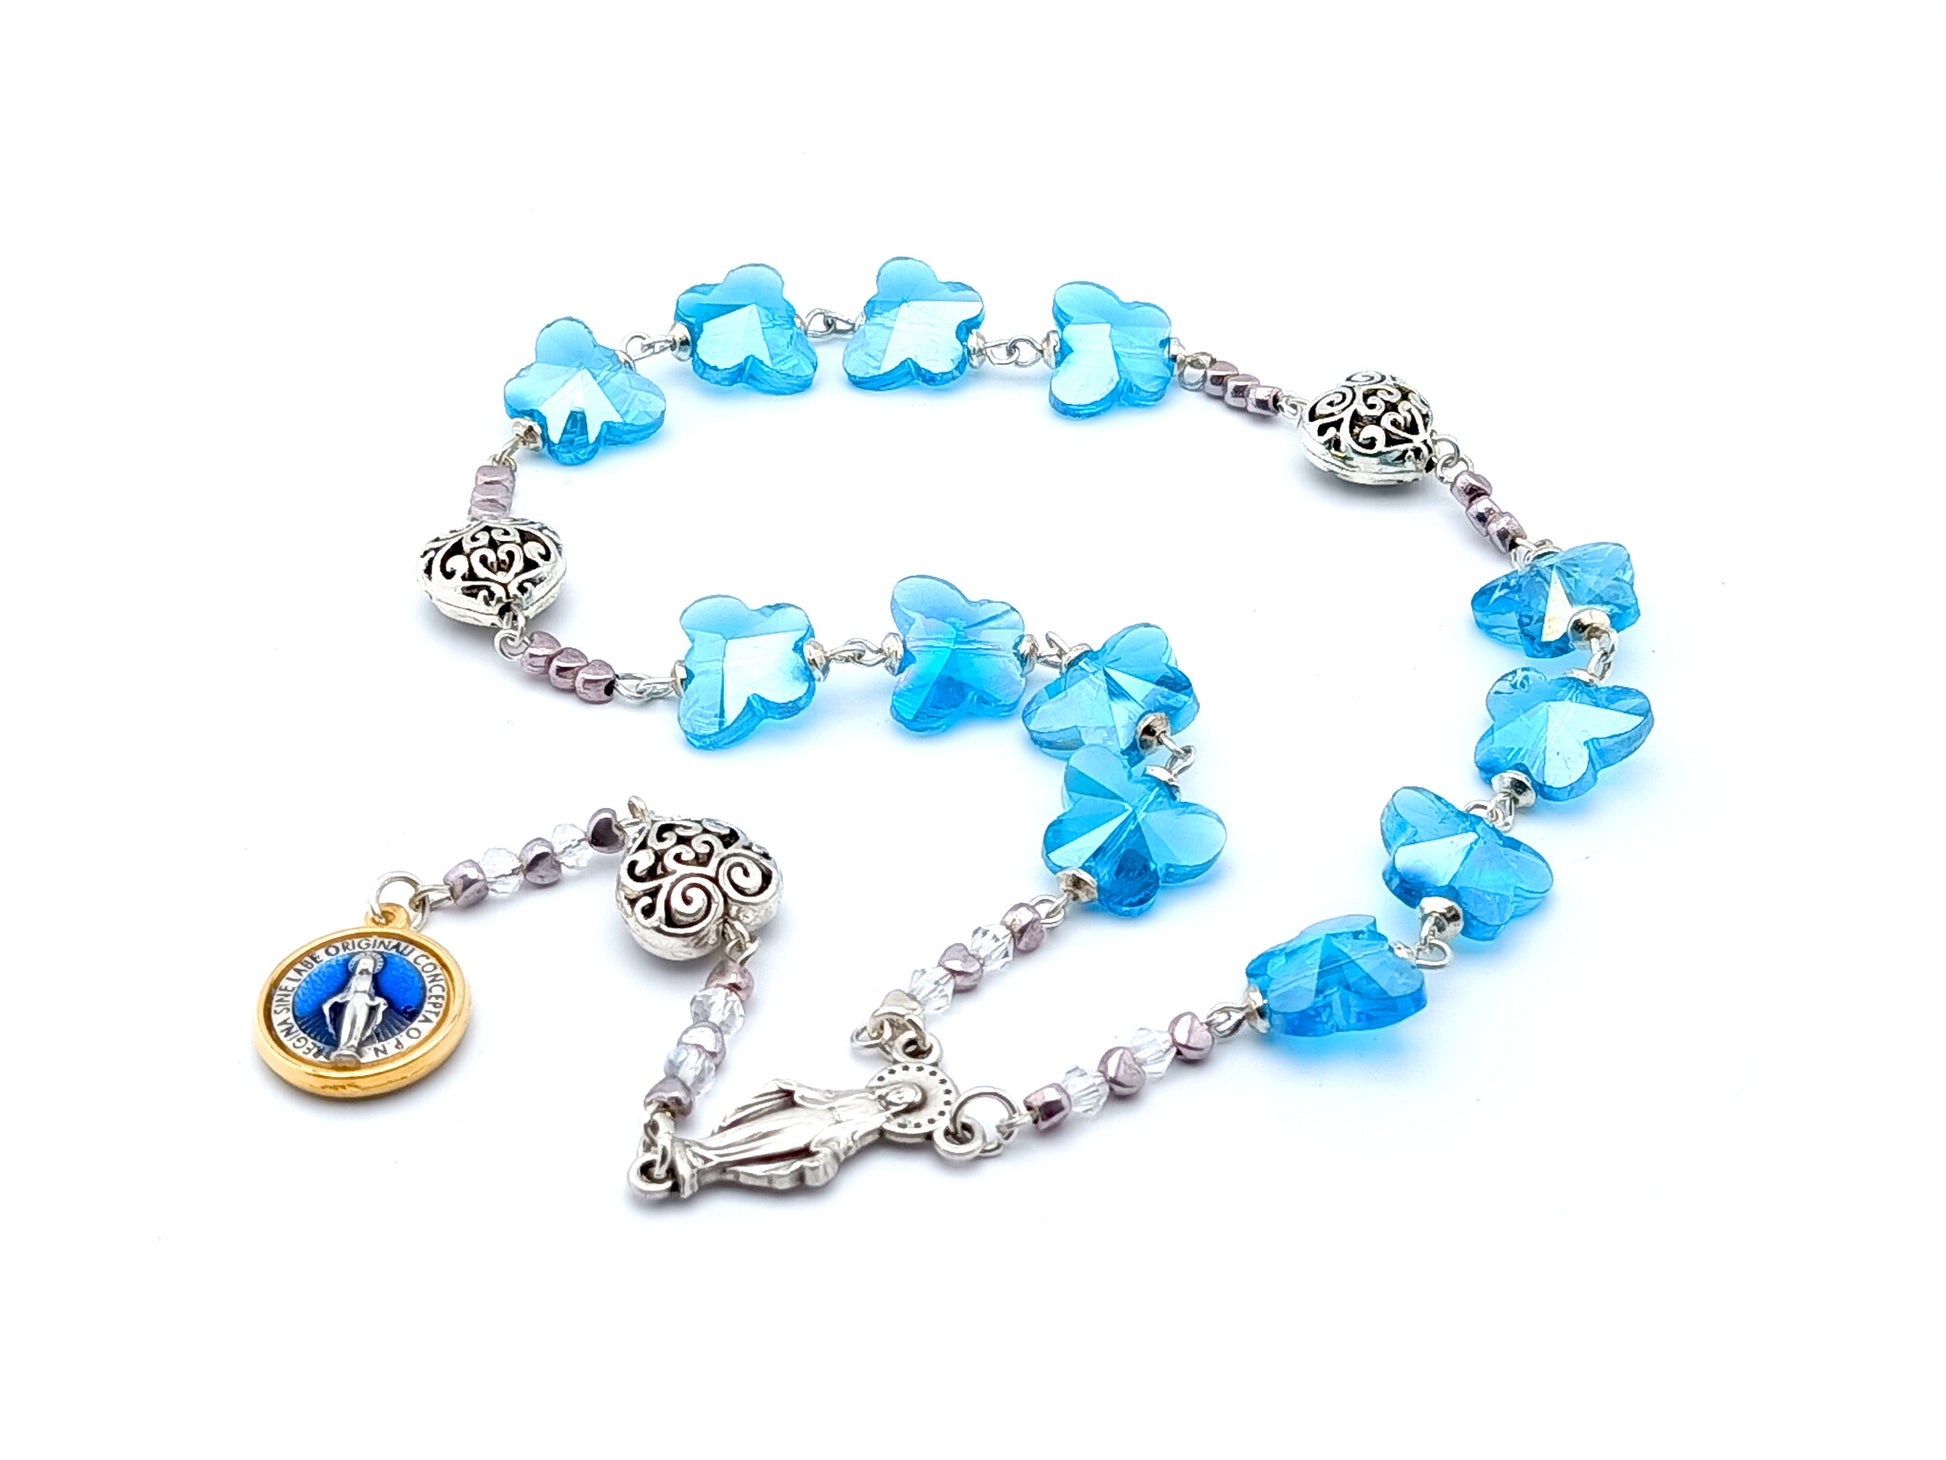 The Immaculate Conception unique rosary beads prayer chaplet with blue crystal and silver filigree heart beads, Our Lady centre medal and Miraculous medal. 